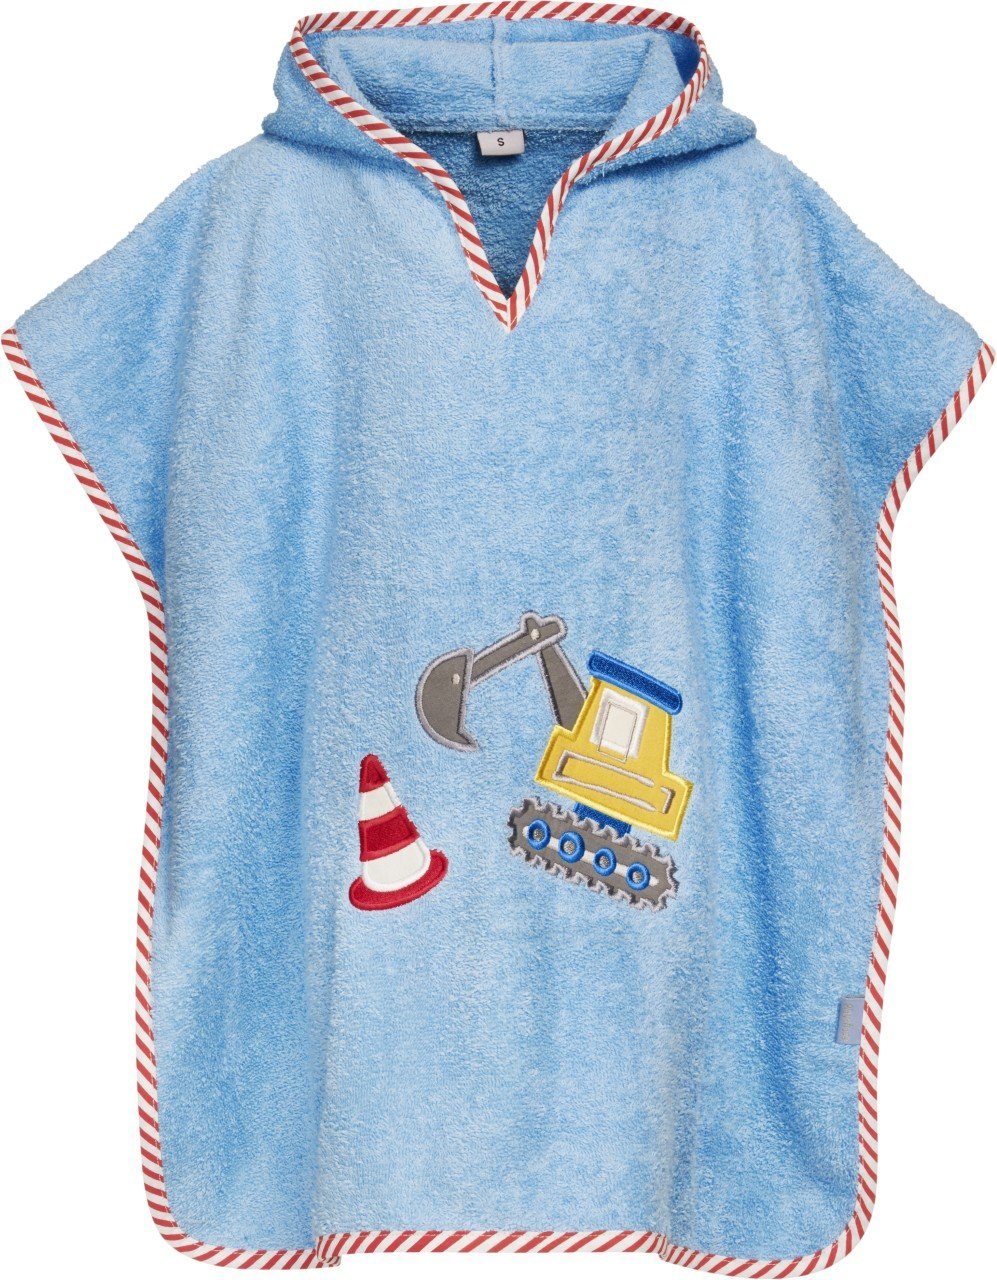 Frottee-Poncho Playshoes Bagger Badeponcho